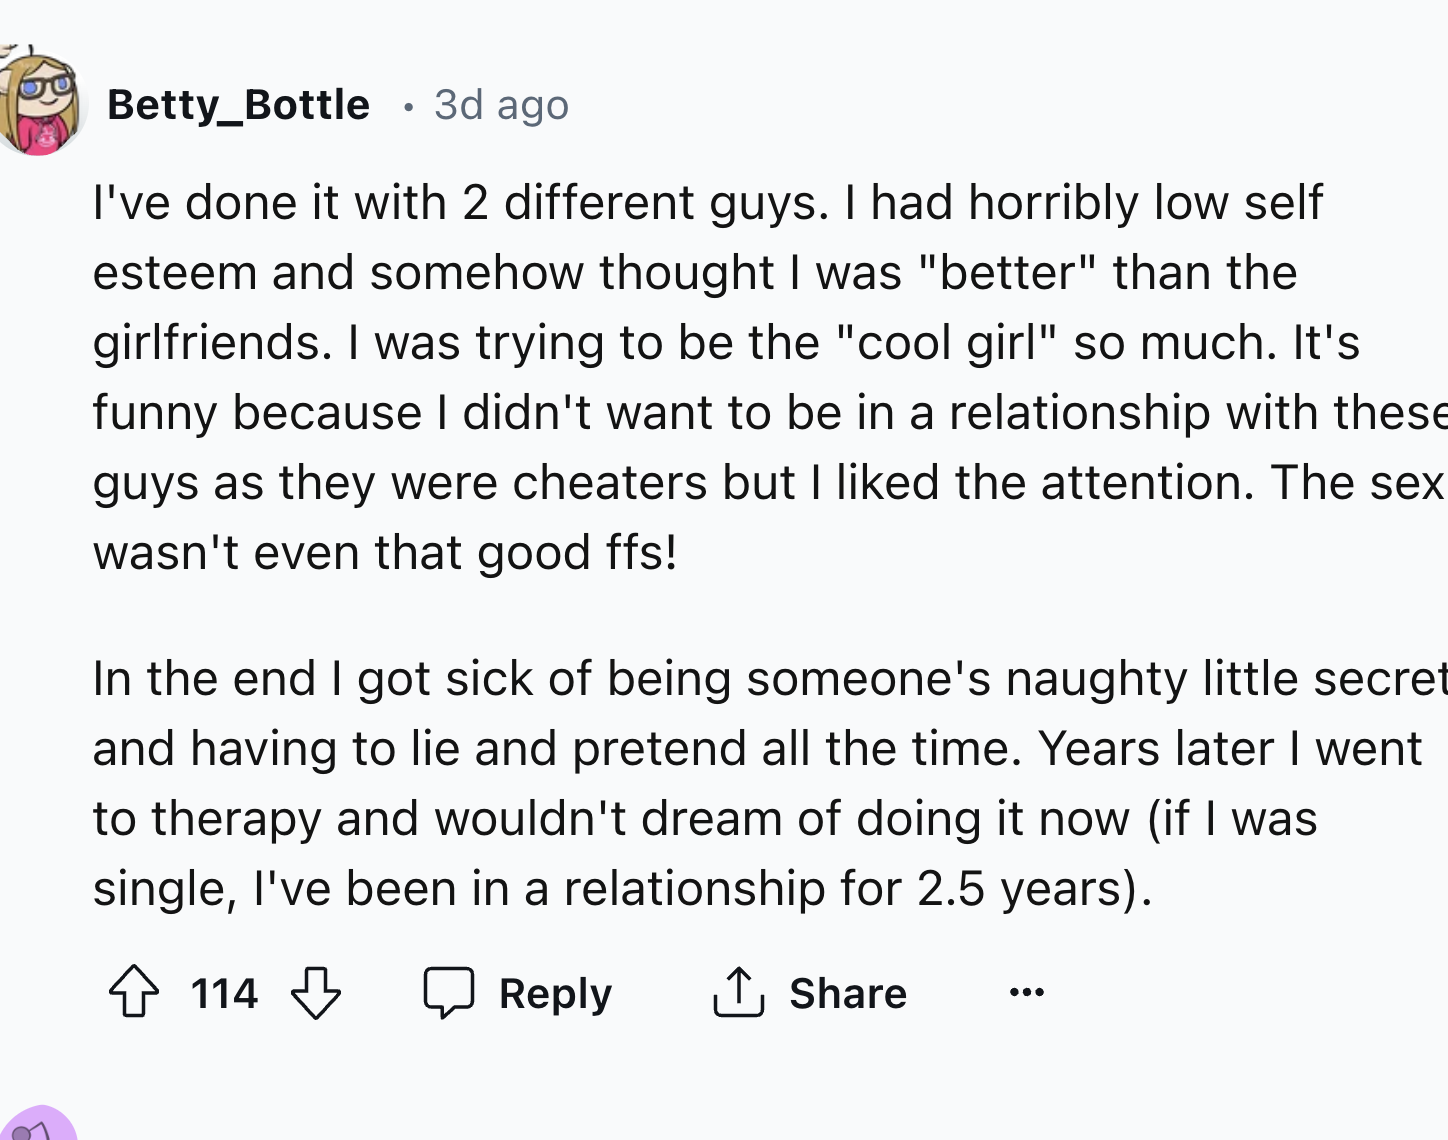 number - Betty_Bottle 3d ago I've done it with 2 different guys. I had horribly low self esteem and somehow thought I was "better" than the girlfriends. I was trying to be the "cool girl" so much. It's funny because I didn't want to be in a relationship w